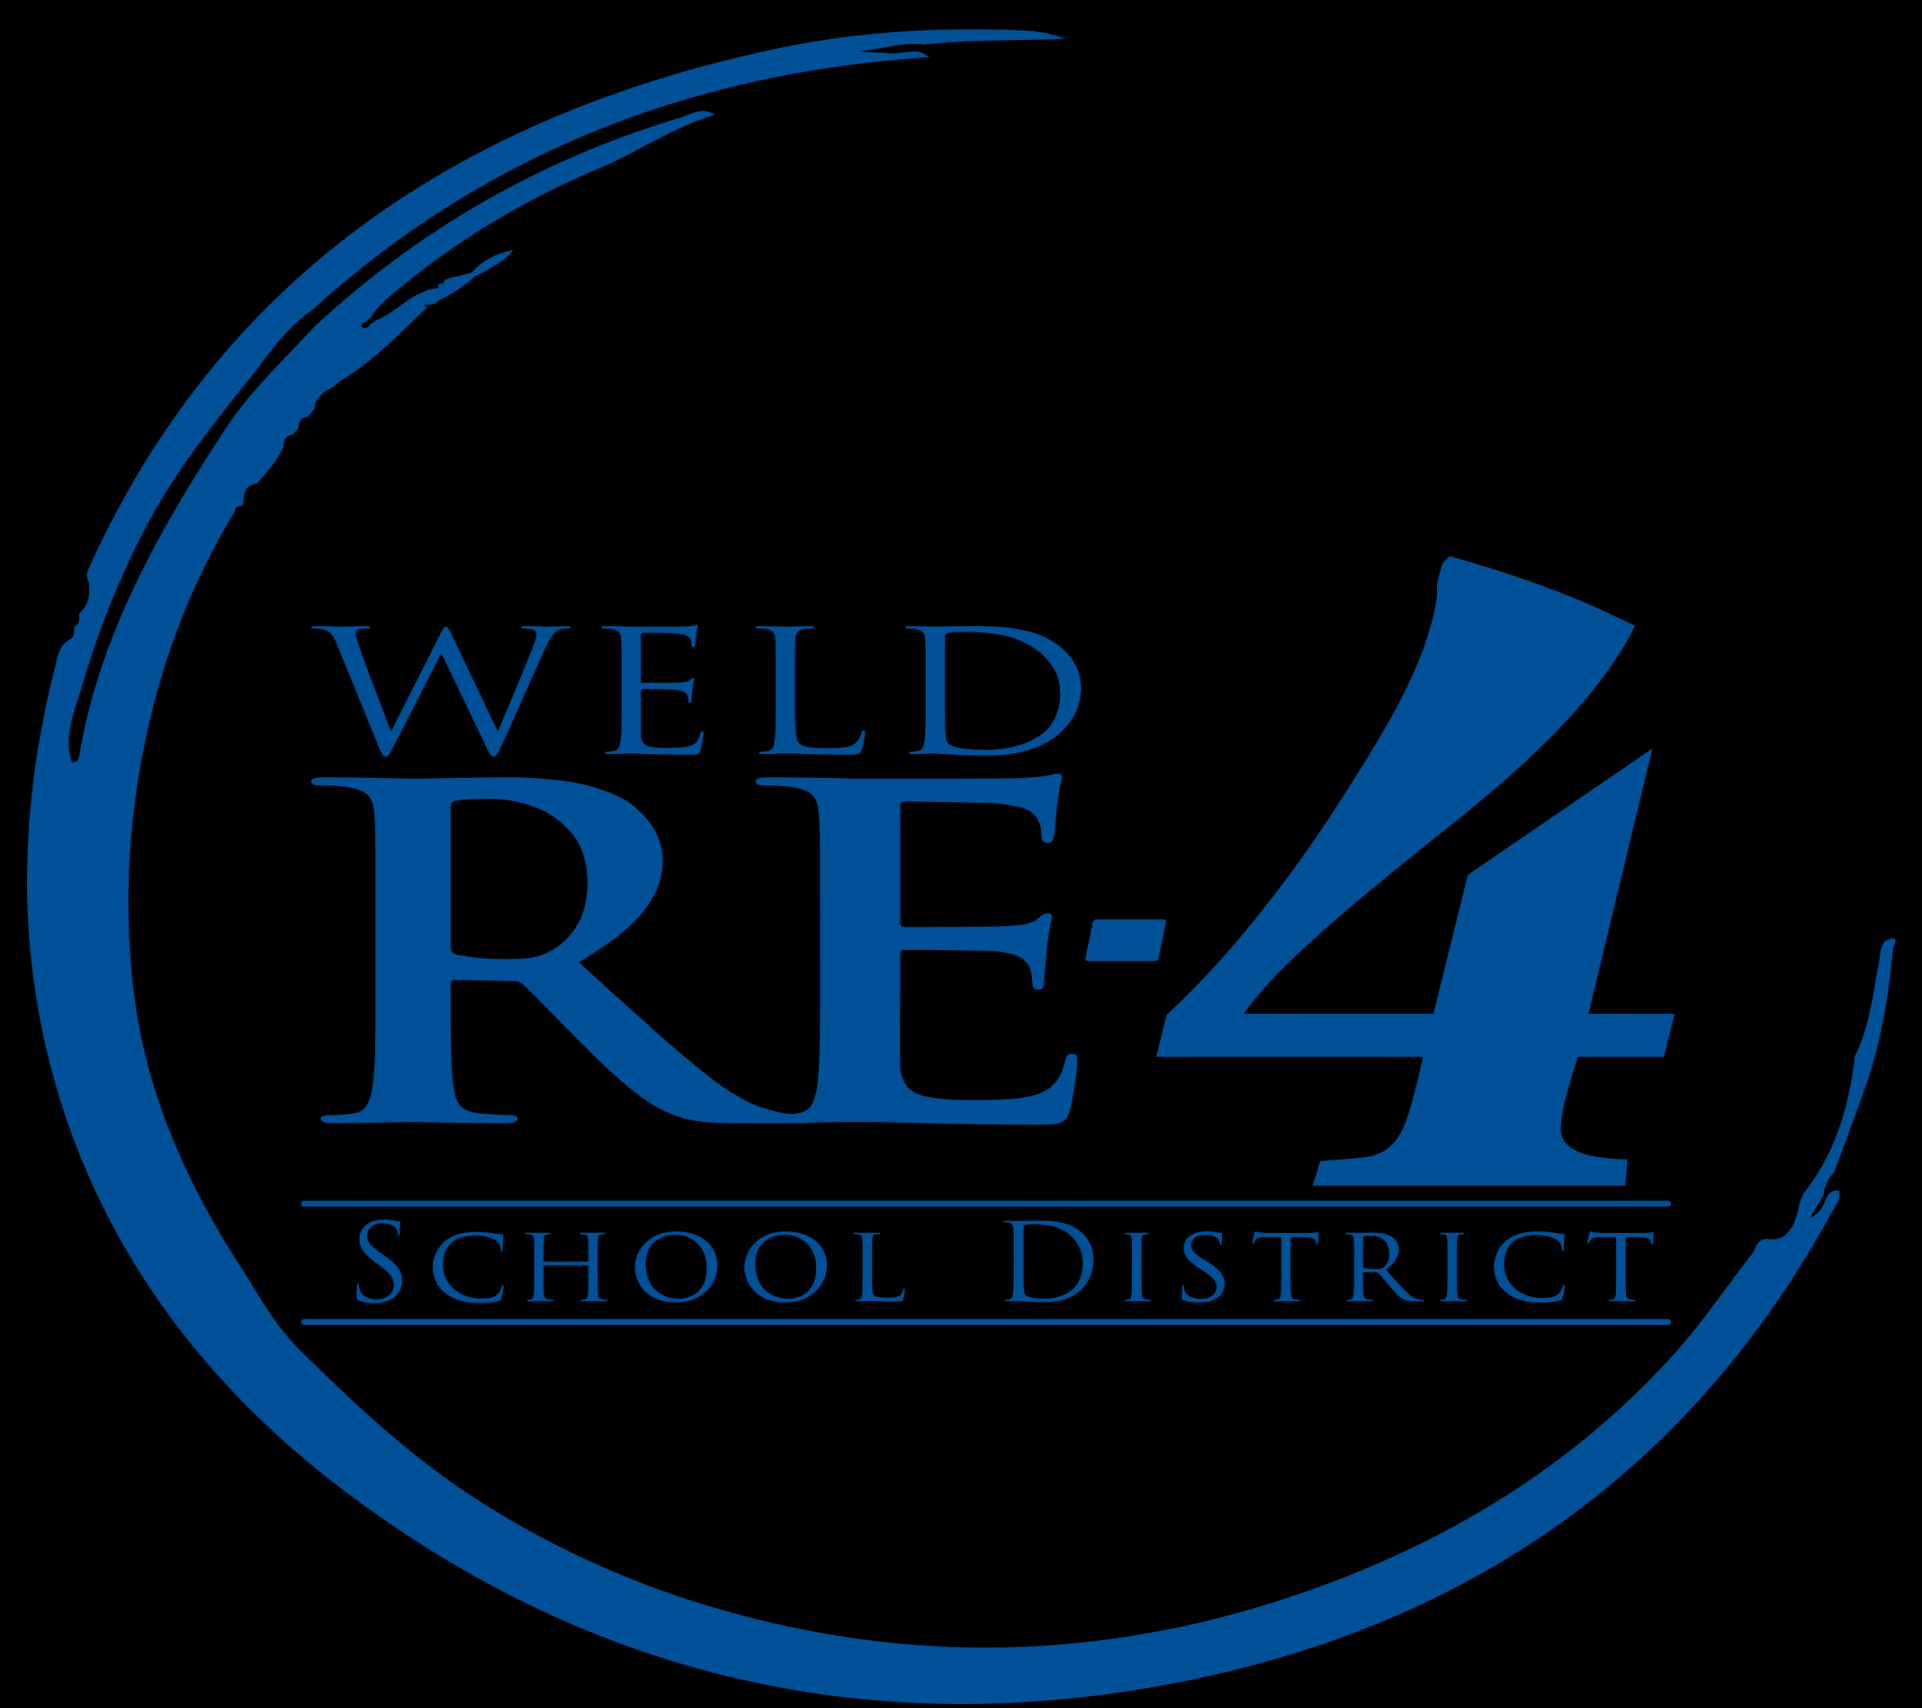 Weld County School District Jobs - Join The WCSD Team And Inspire The Next Generation!